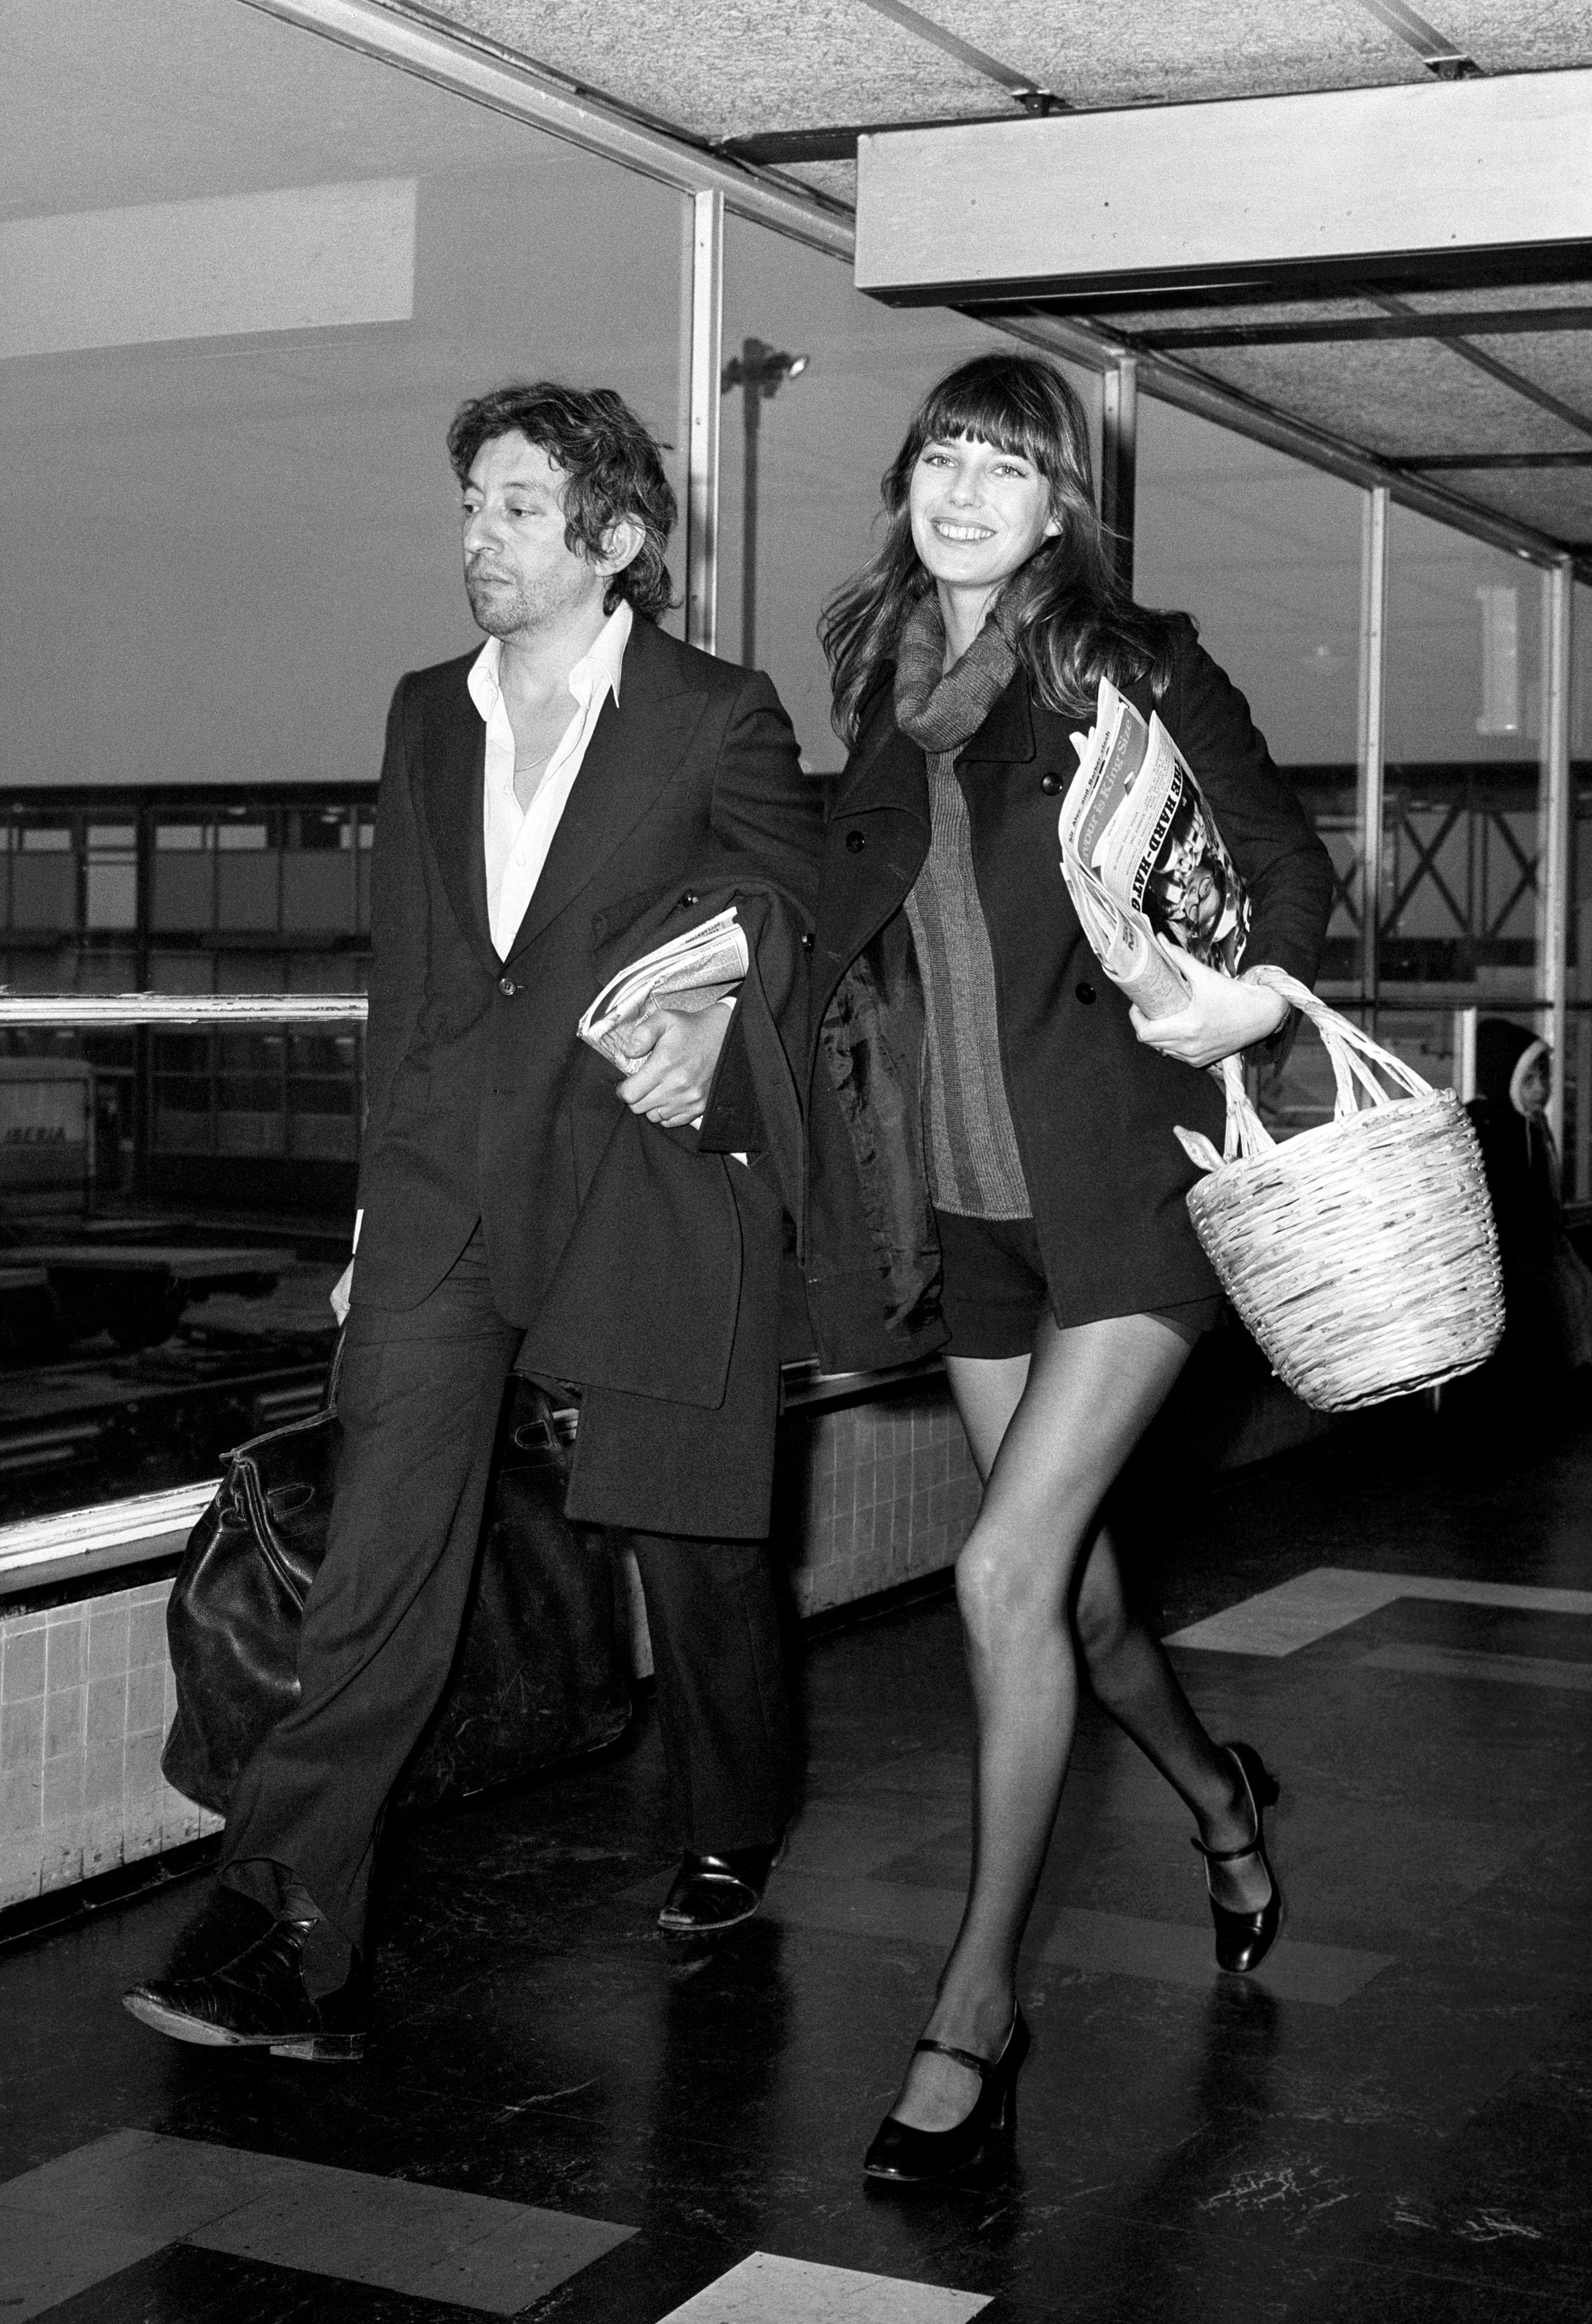 Jane Birkin Turns 70! 6 Style Lessons From the Fashion Icon